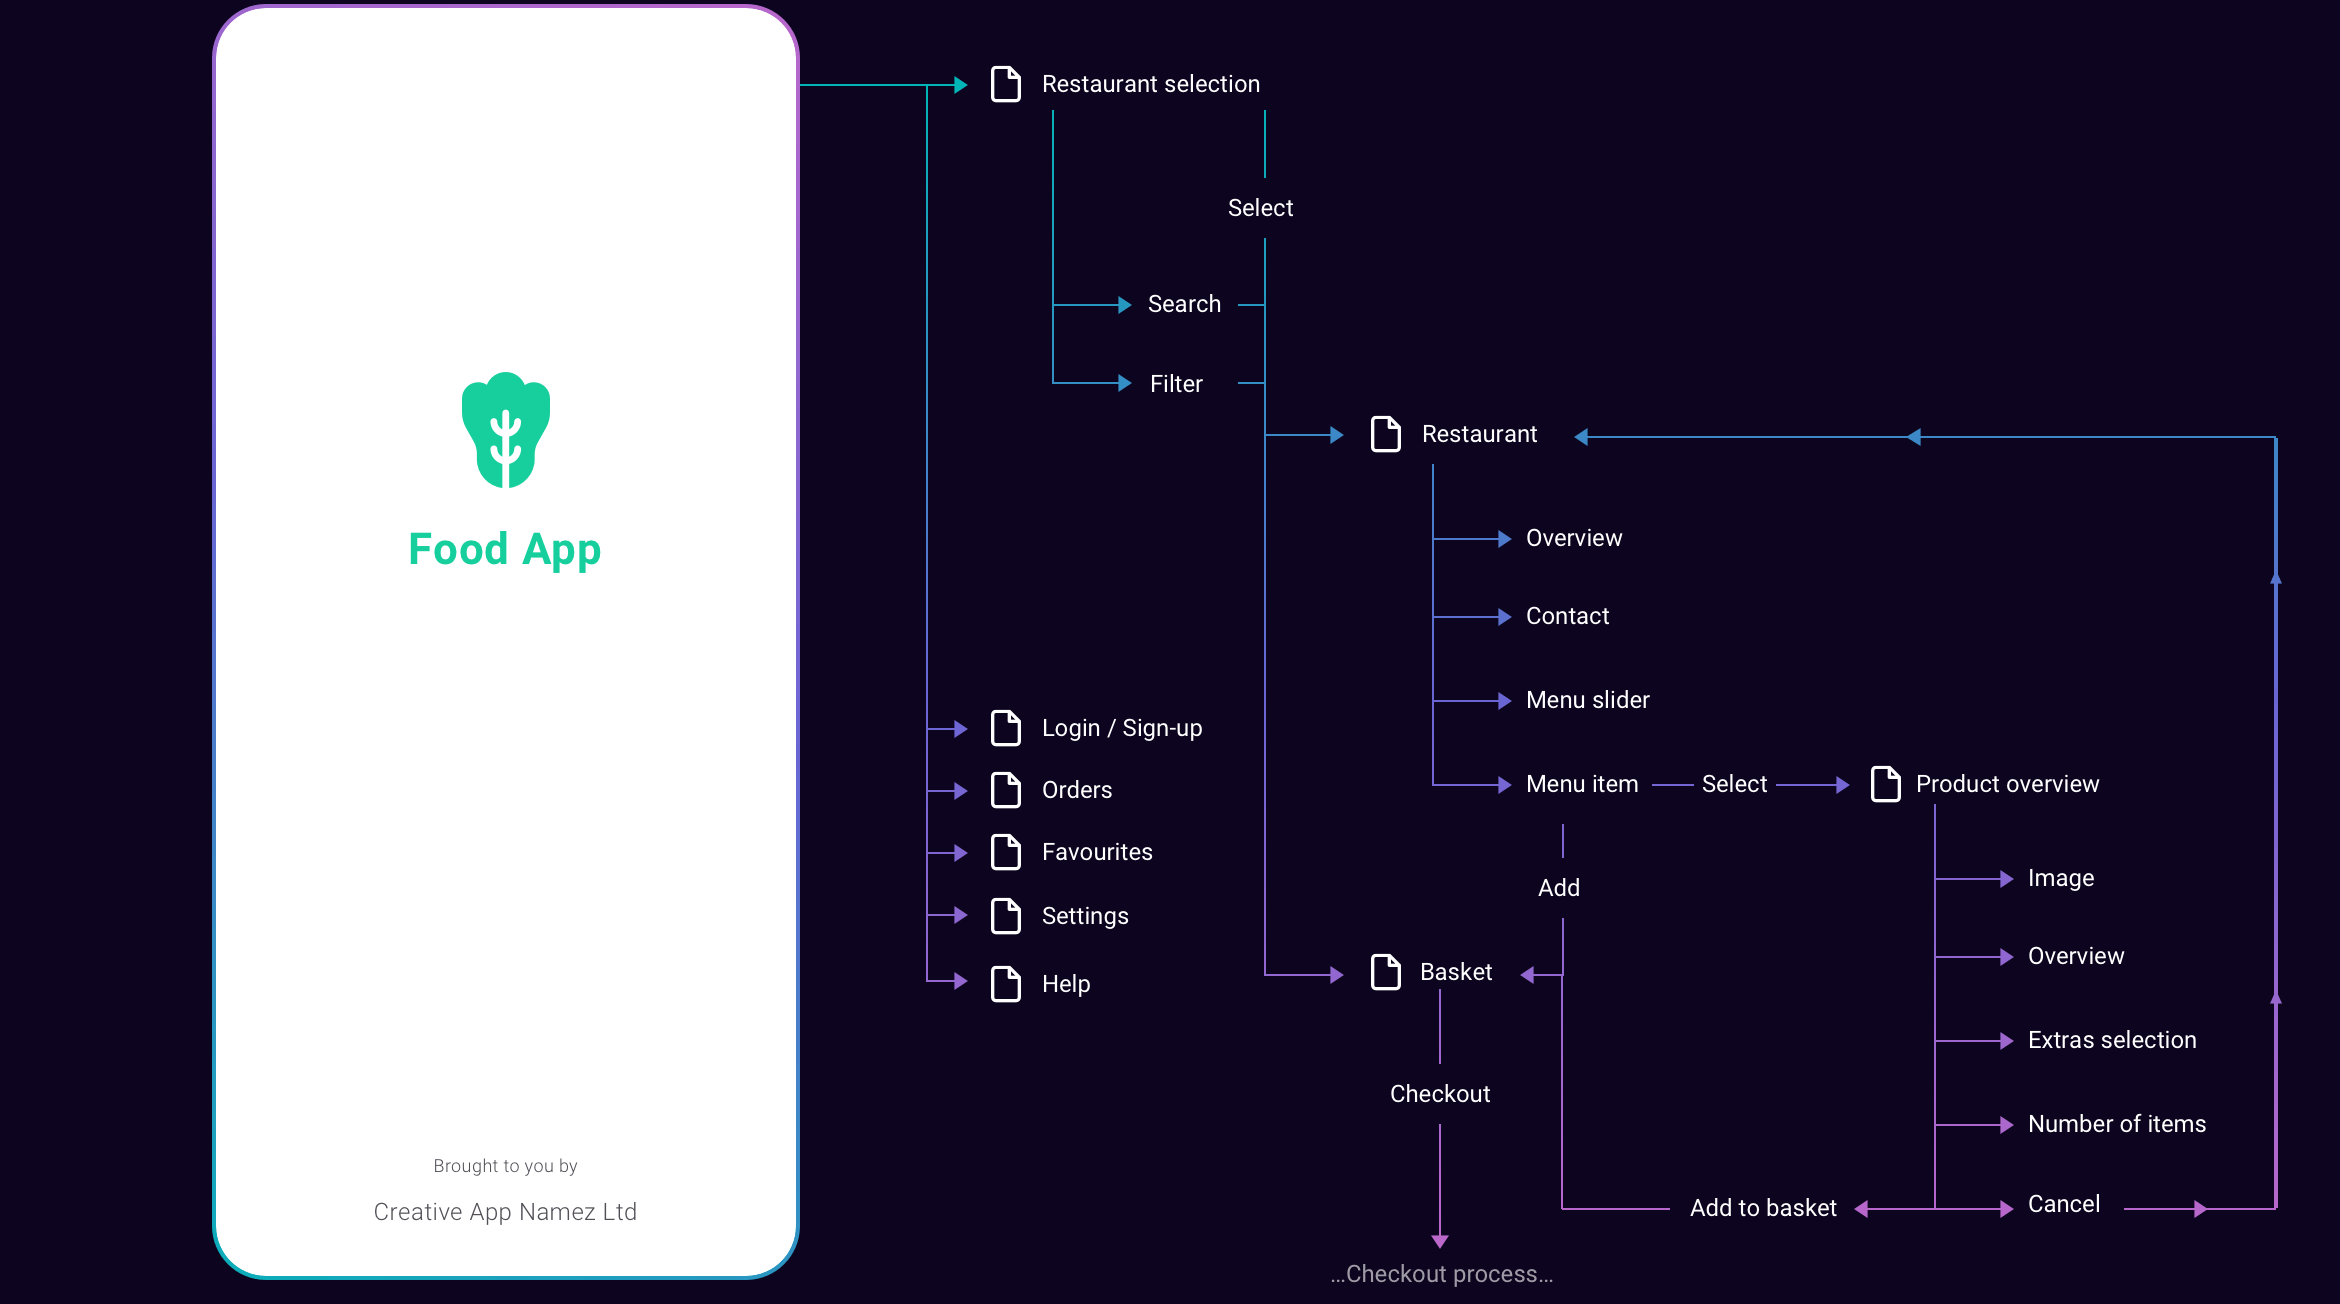 A basic flowchart of the app showing the key screens